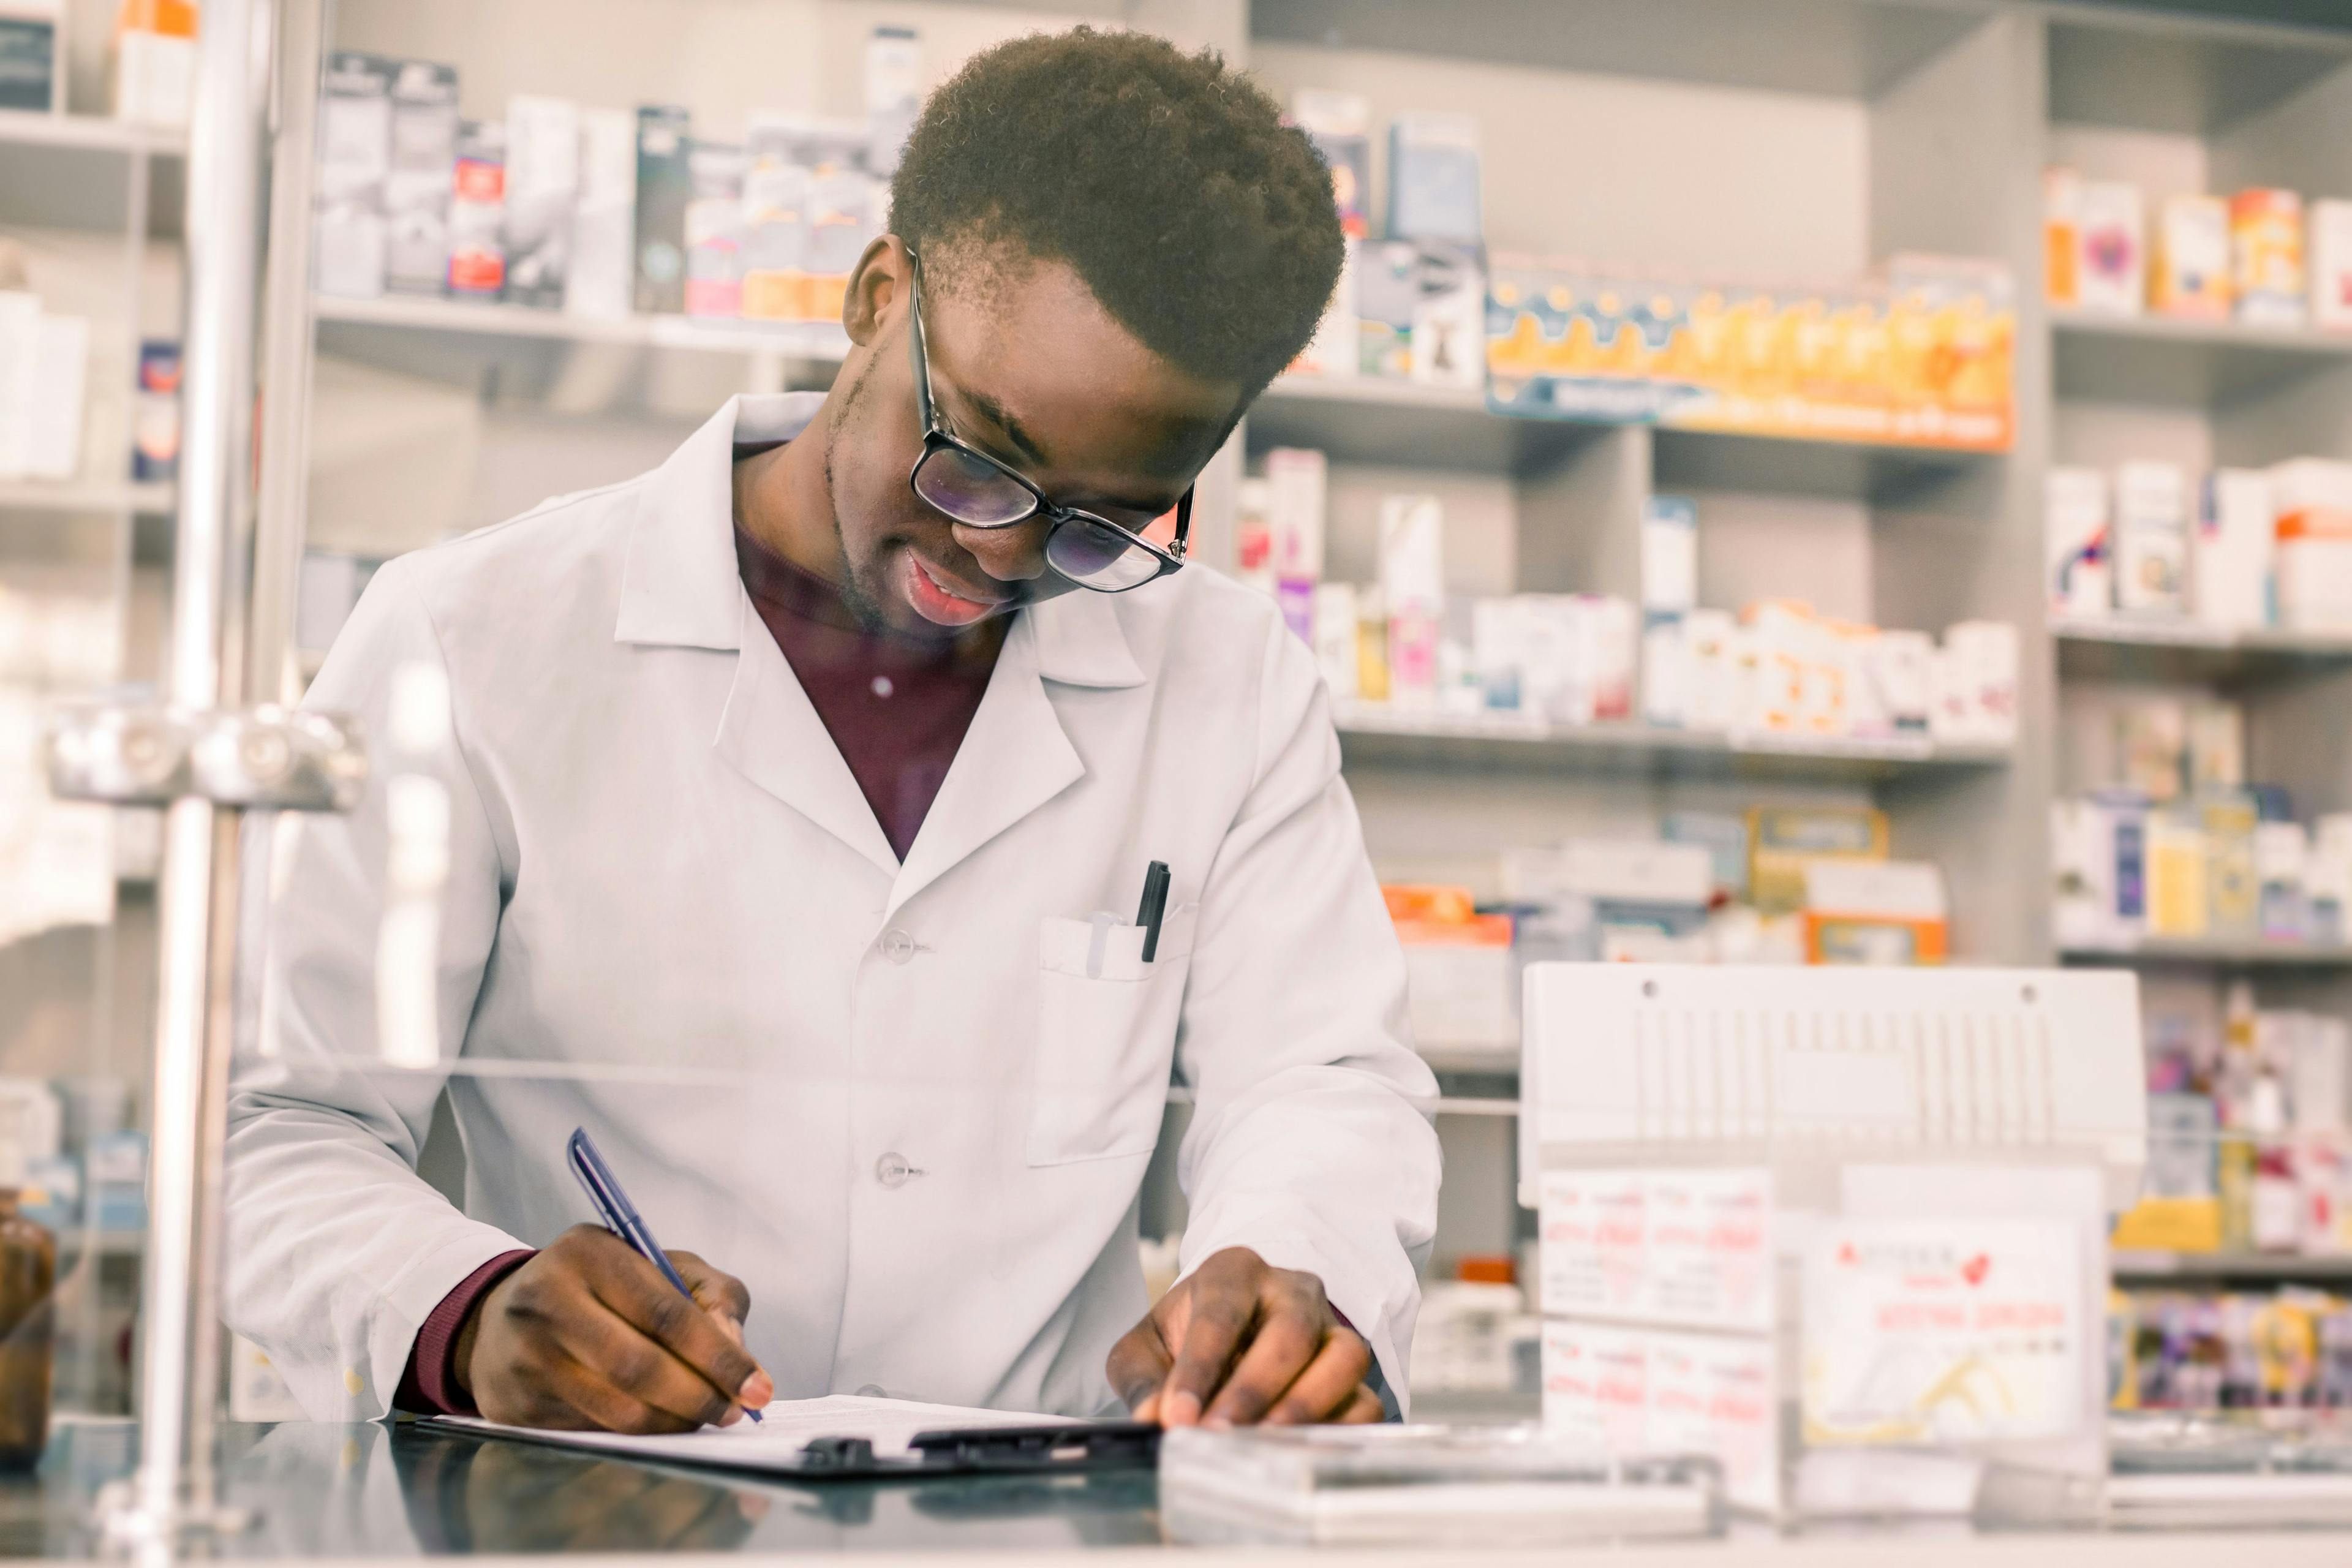 Portrait of a happy African American pharmacist writing prescription at workplace in modern pharmacy | Image Credit: sofiko14 - stock.adobe.com